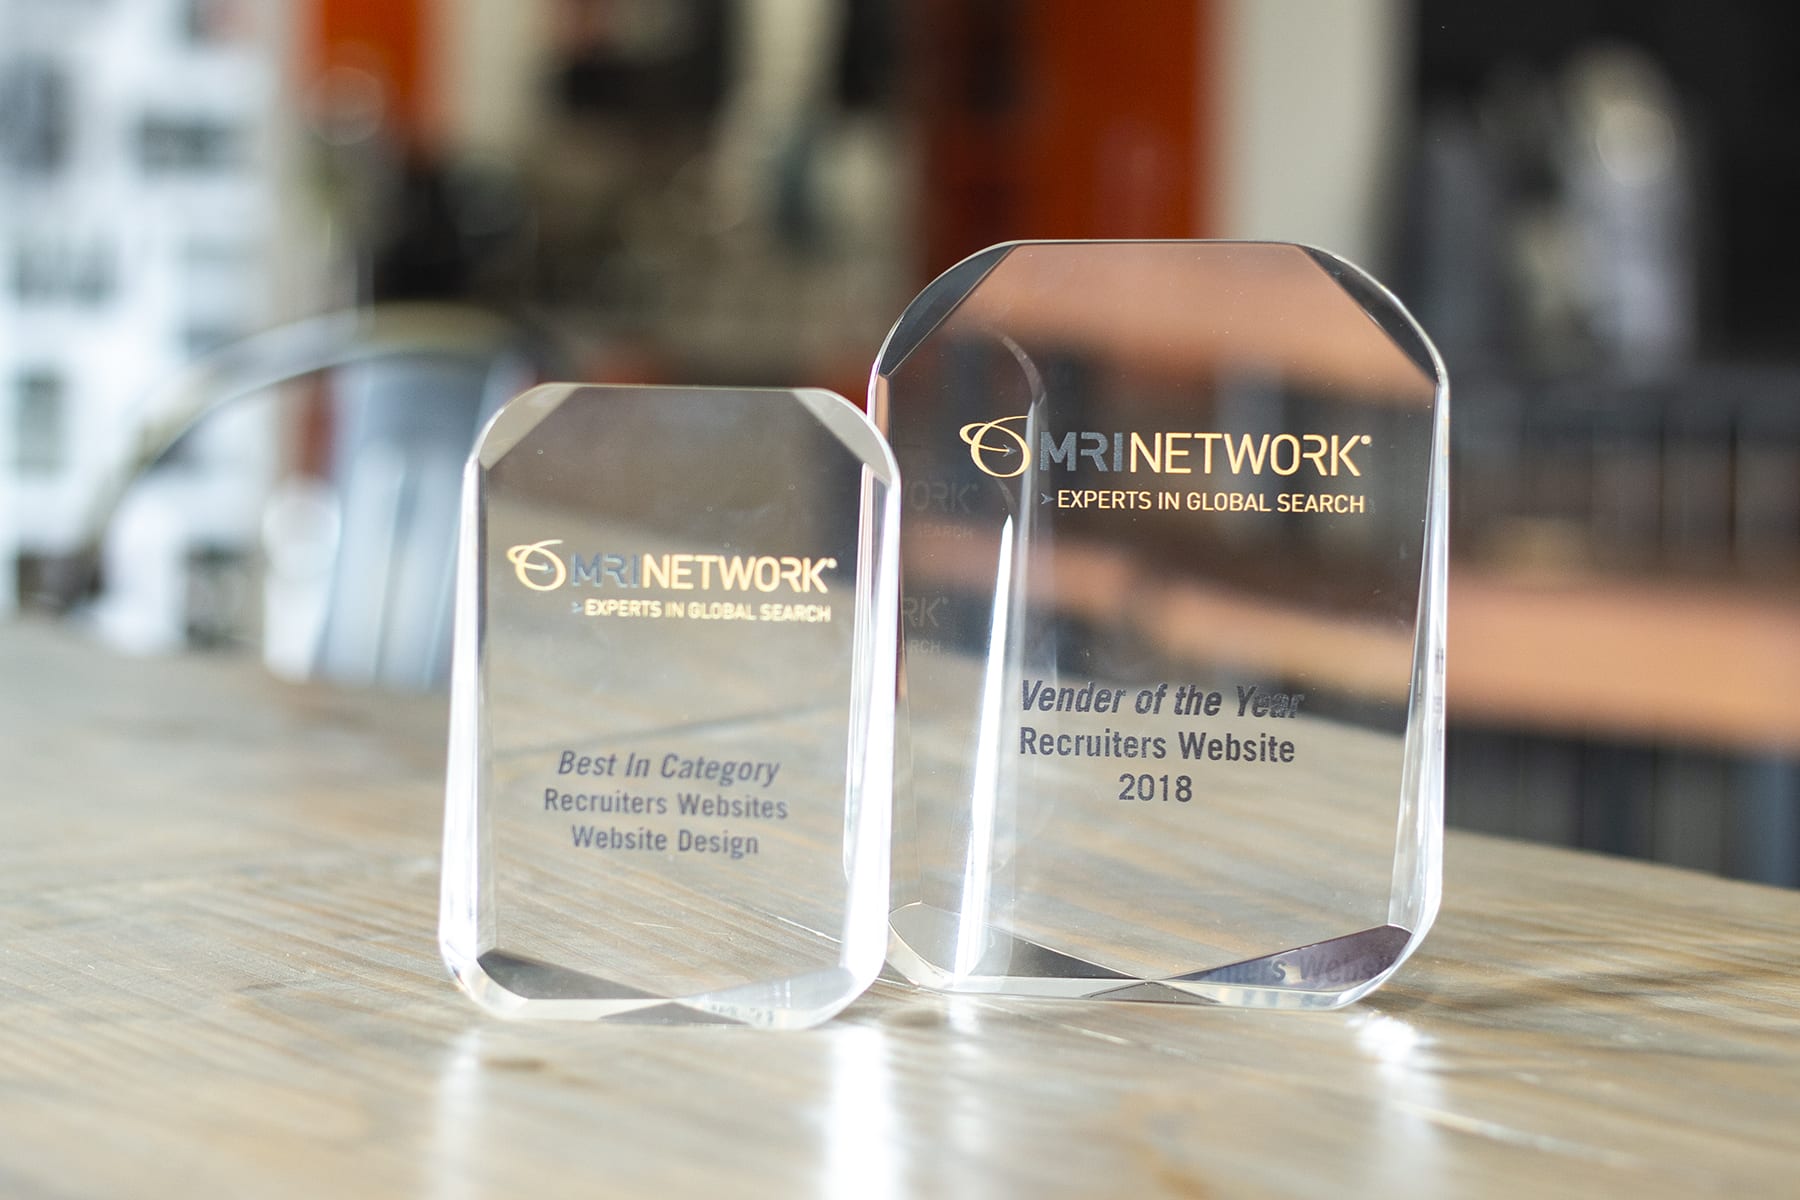 Recruiters Websites received the top honor, Vendor of the Year, at the October 2018 MRINetwork Global Conference in St. Louis, as well as Best in Category for Website Design. 